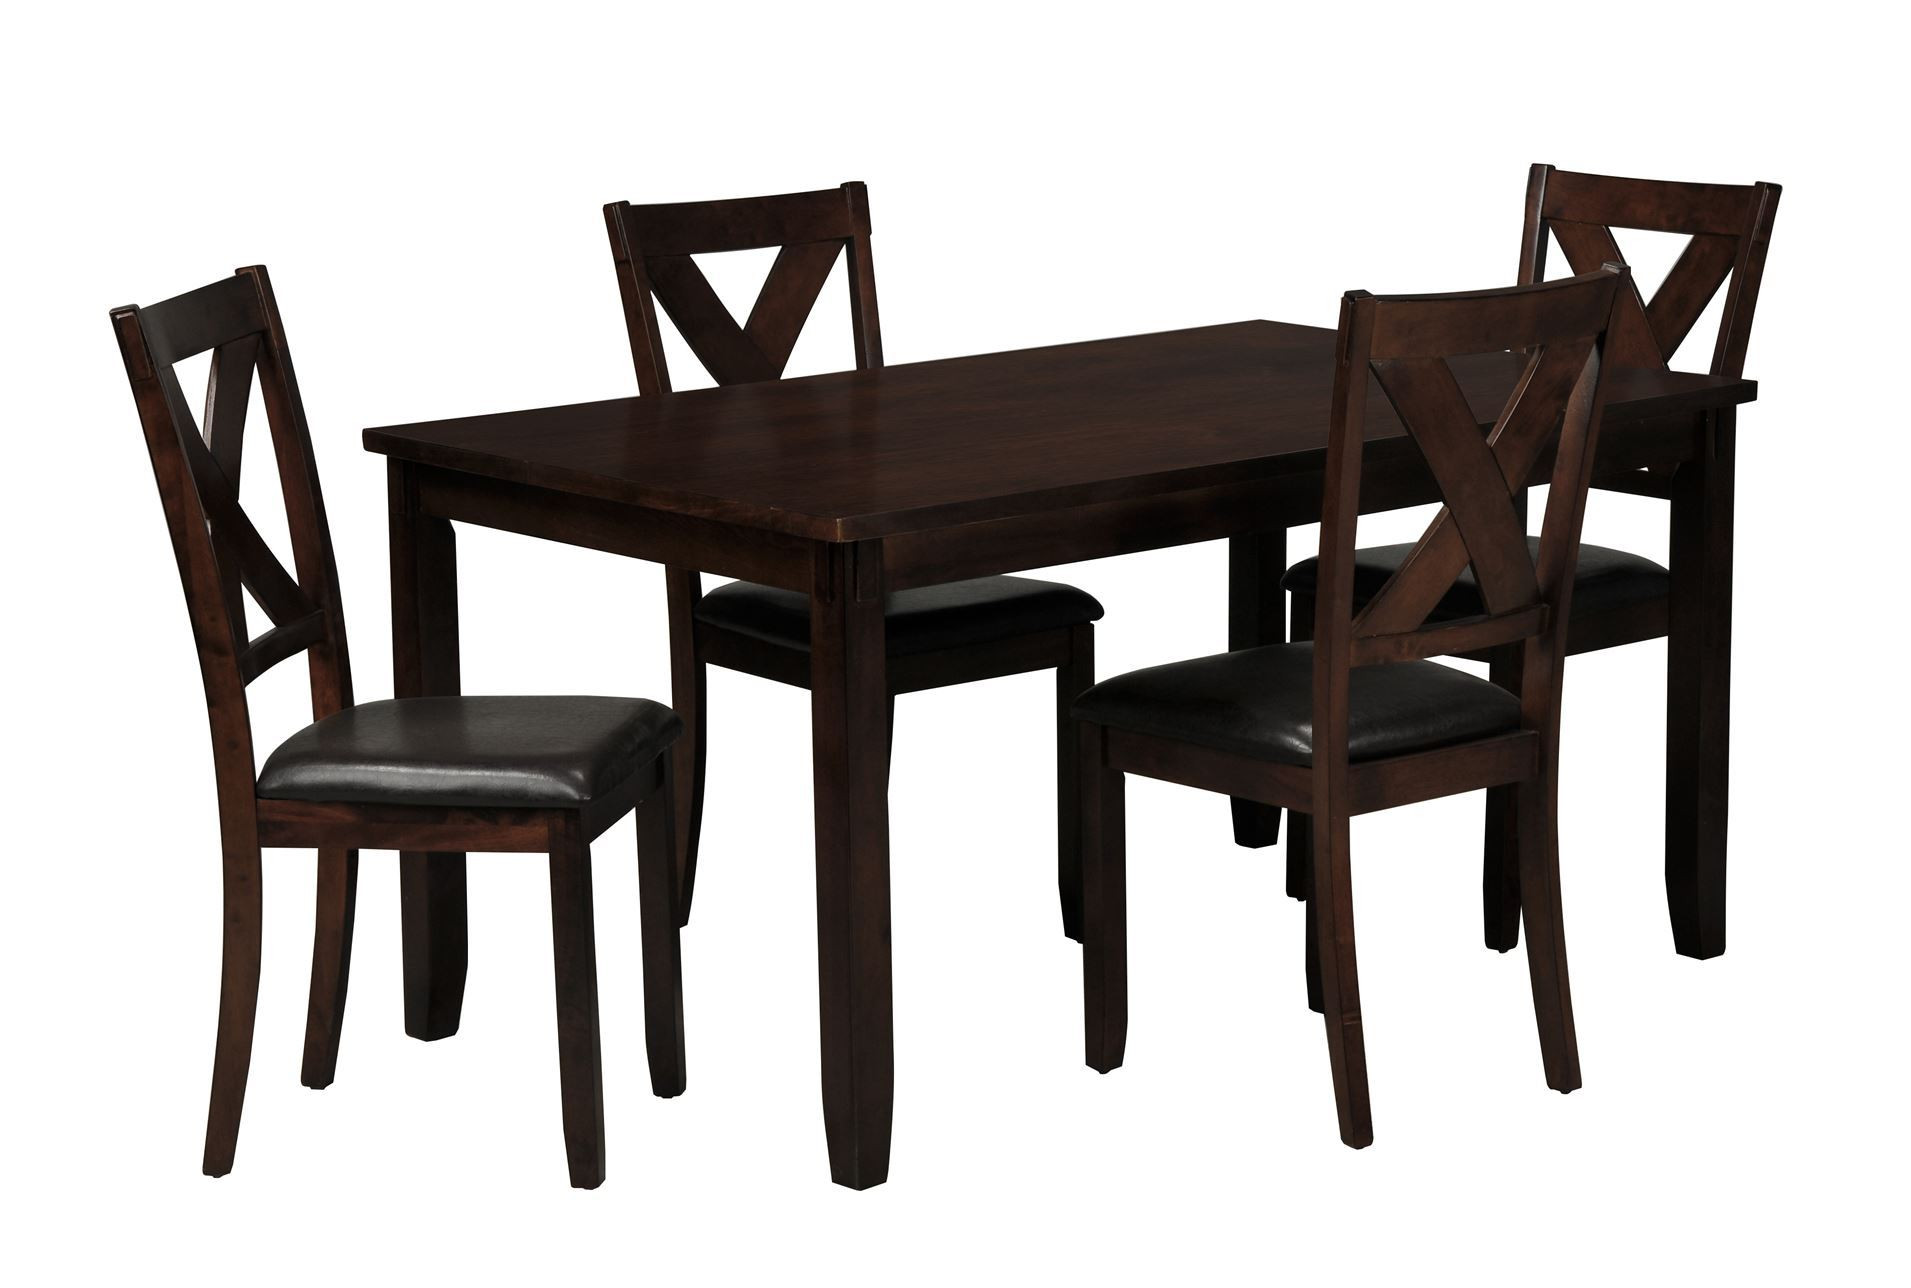 Living Spaces Dining Room Tables
 Dakota 5 Piece Dining Table W Side Chairs Living Spaces